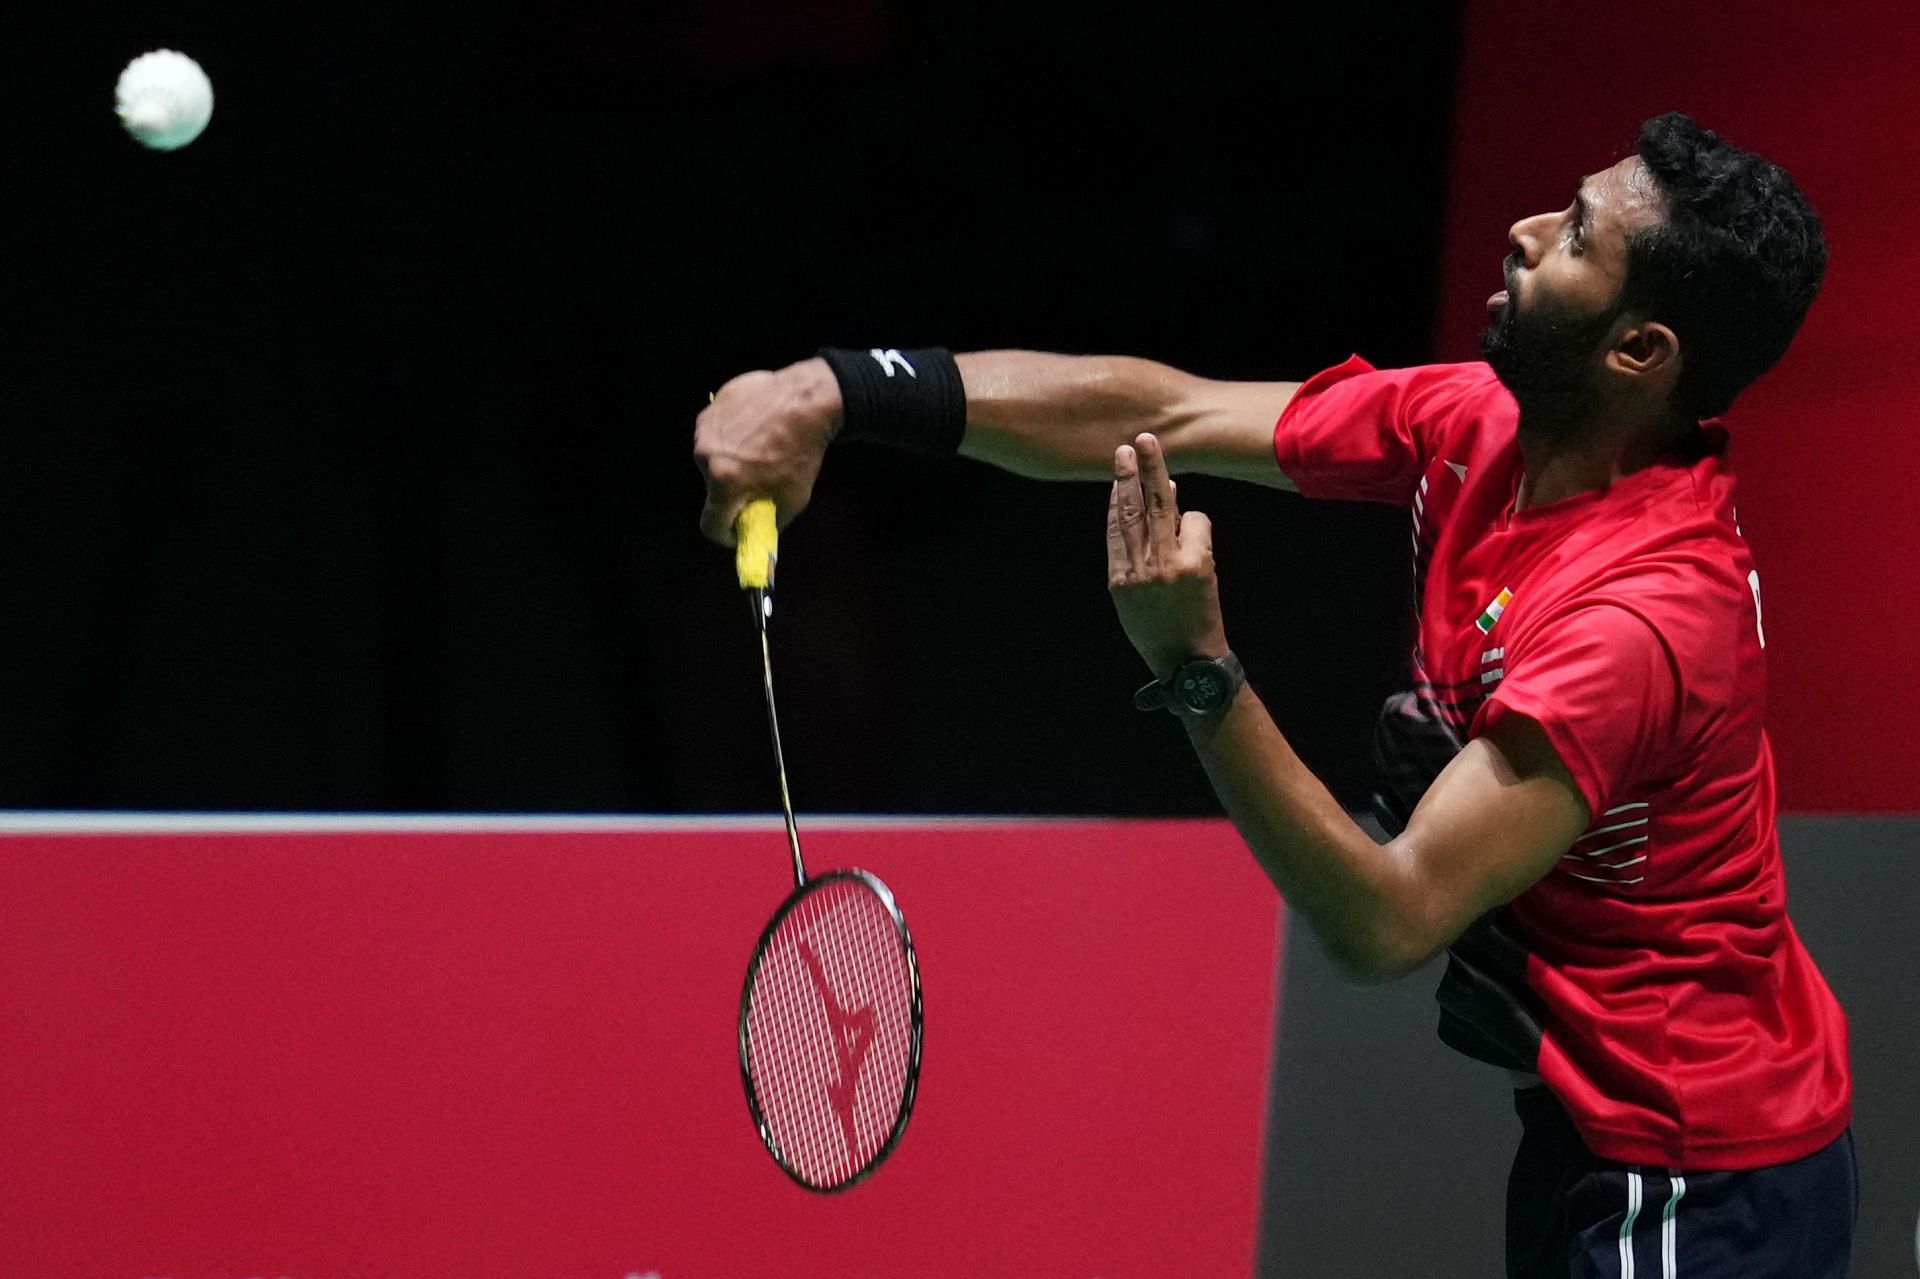 Australian Open Badminton 2023 HS Prannoy vs Anthony Sinisuka Ginting, head-to-head, prediction, where to watch and live streaming details